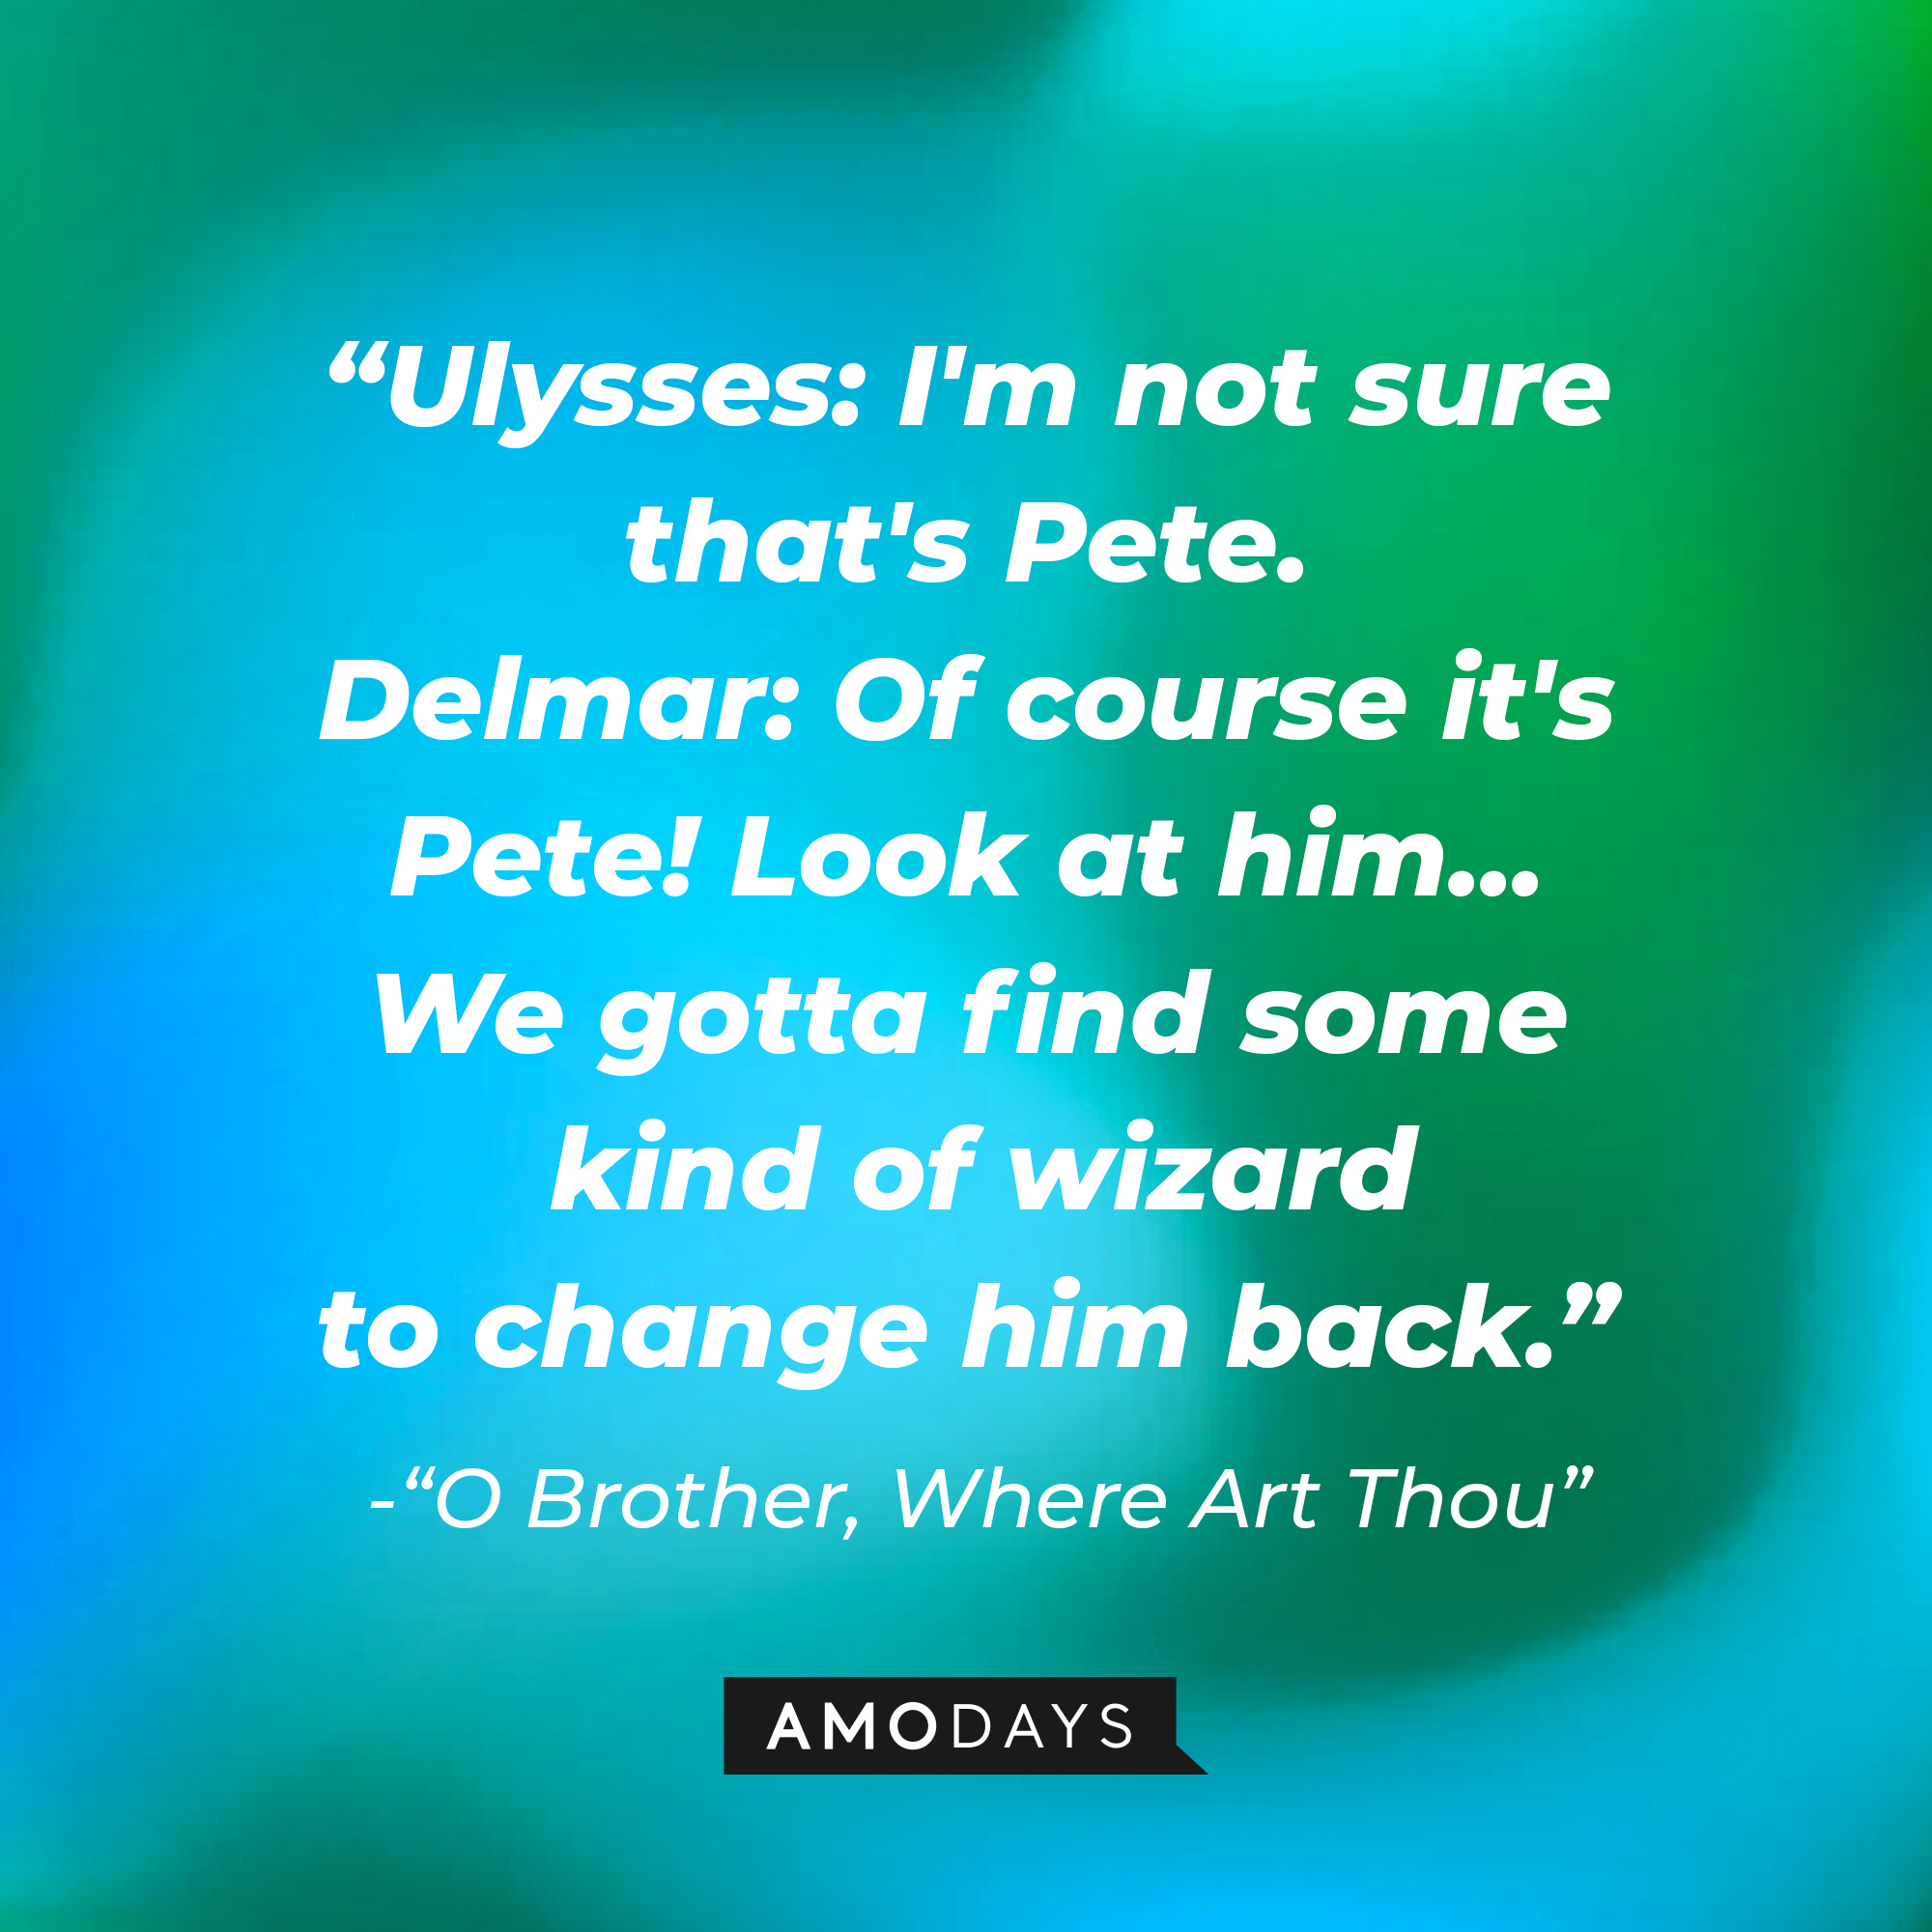 Delmar O'Donnell's dialogue in "O Brother, Where Art Thou:" "Ulysses: I'm not sure that's Pete. Delmar: Of course it's Pete! Look at him... We gotta find some kind of wizard to change him back."  | Source: AmoDays